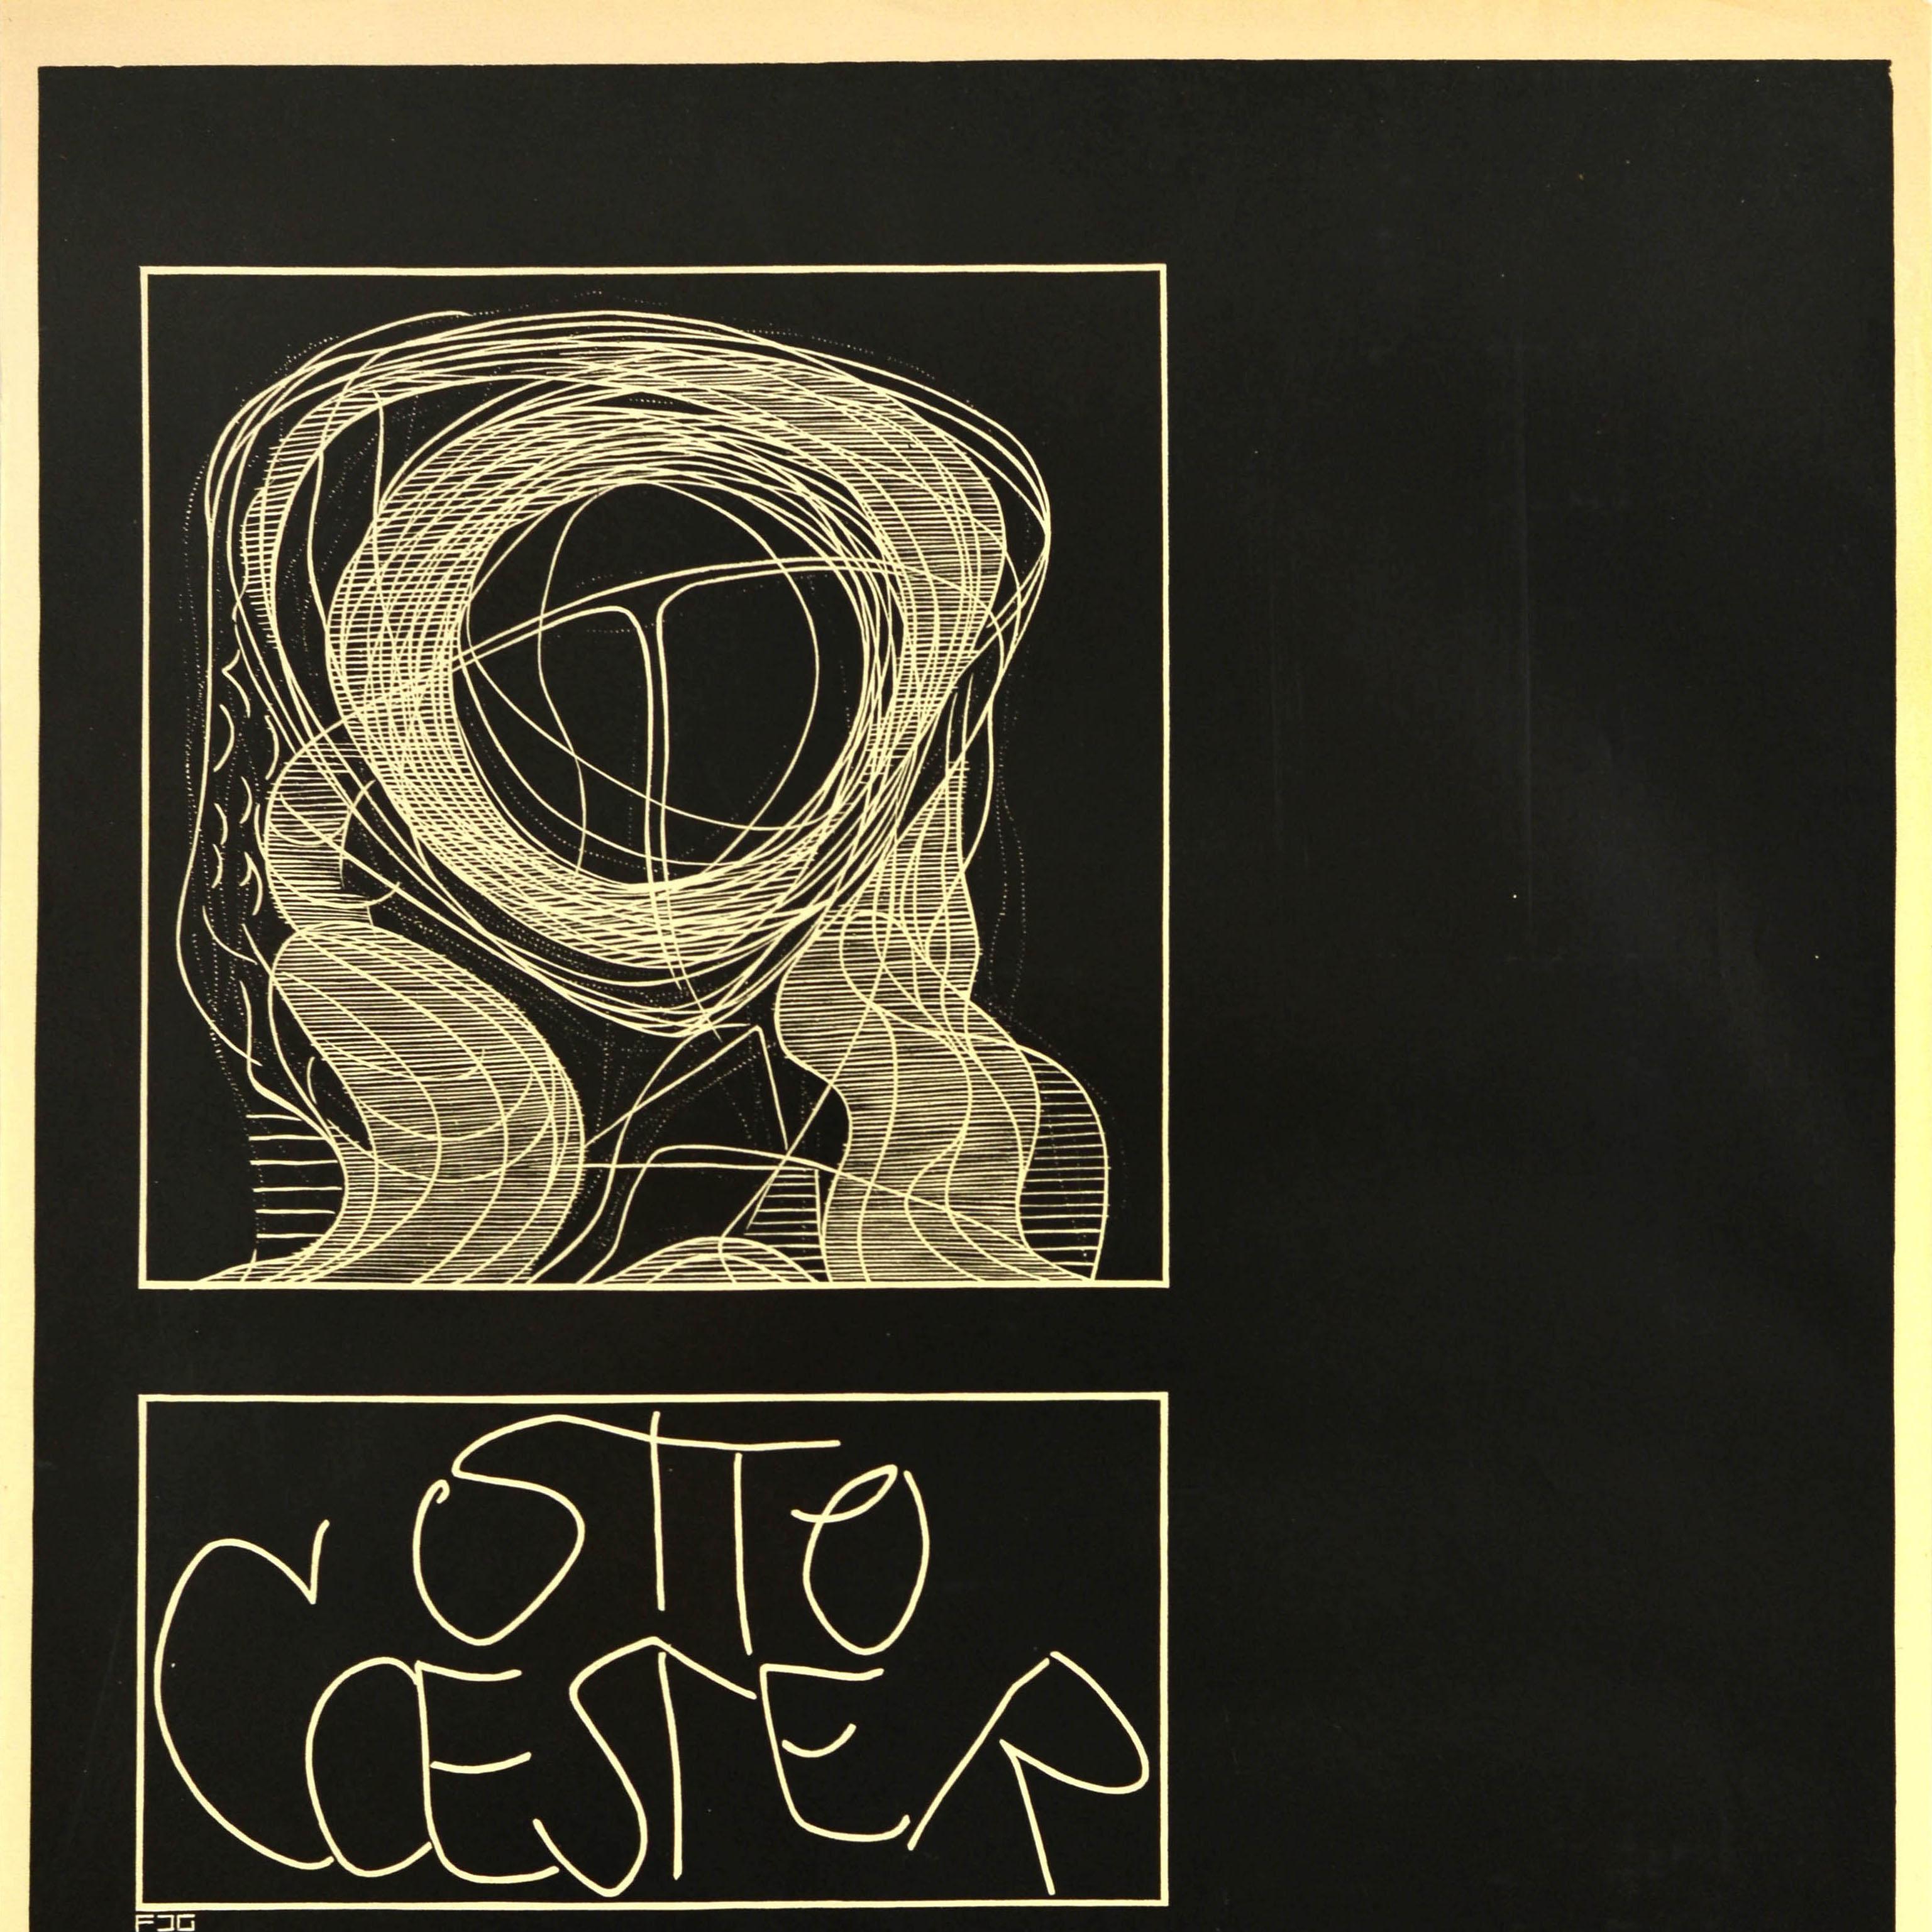 German Original Vintage Advertising Poster Otto Coester Abstract Art Exhibition Etching For Sale